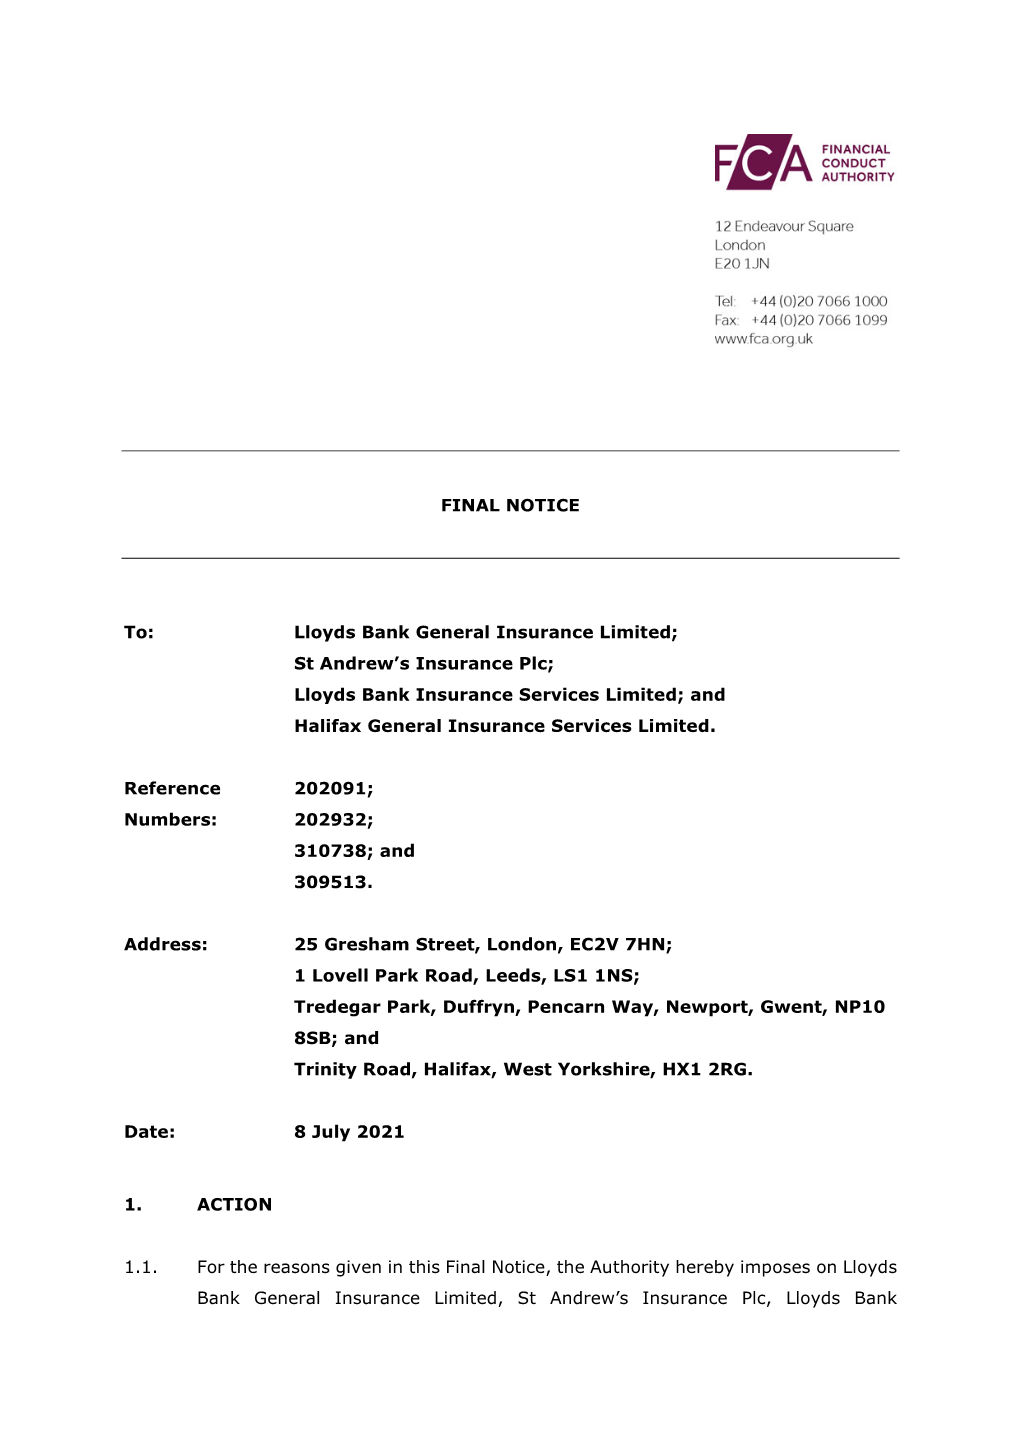 Final Notice 2021:Lloyds Bank General Insurance Limited, St